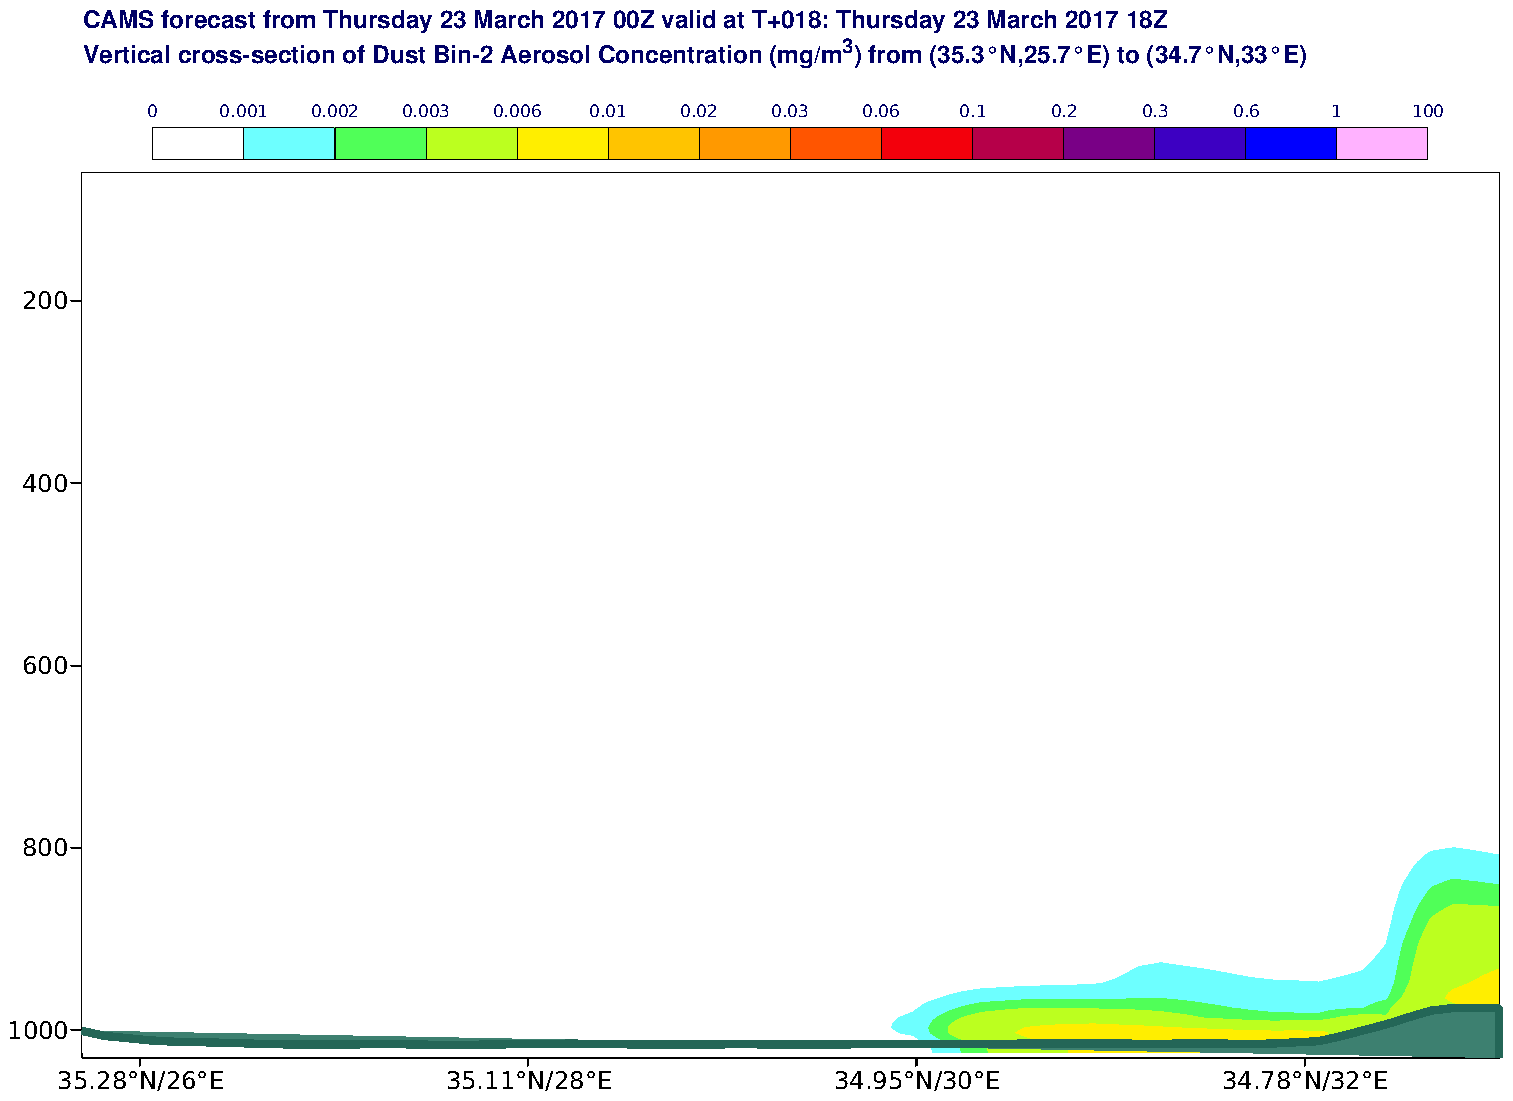 Vertical cross-section of Dust Bin-2 Aerosol Concentration (mg/m3) valid at T18 - 2017-03-23 18:00